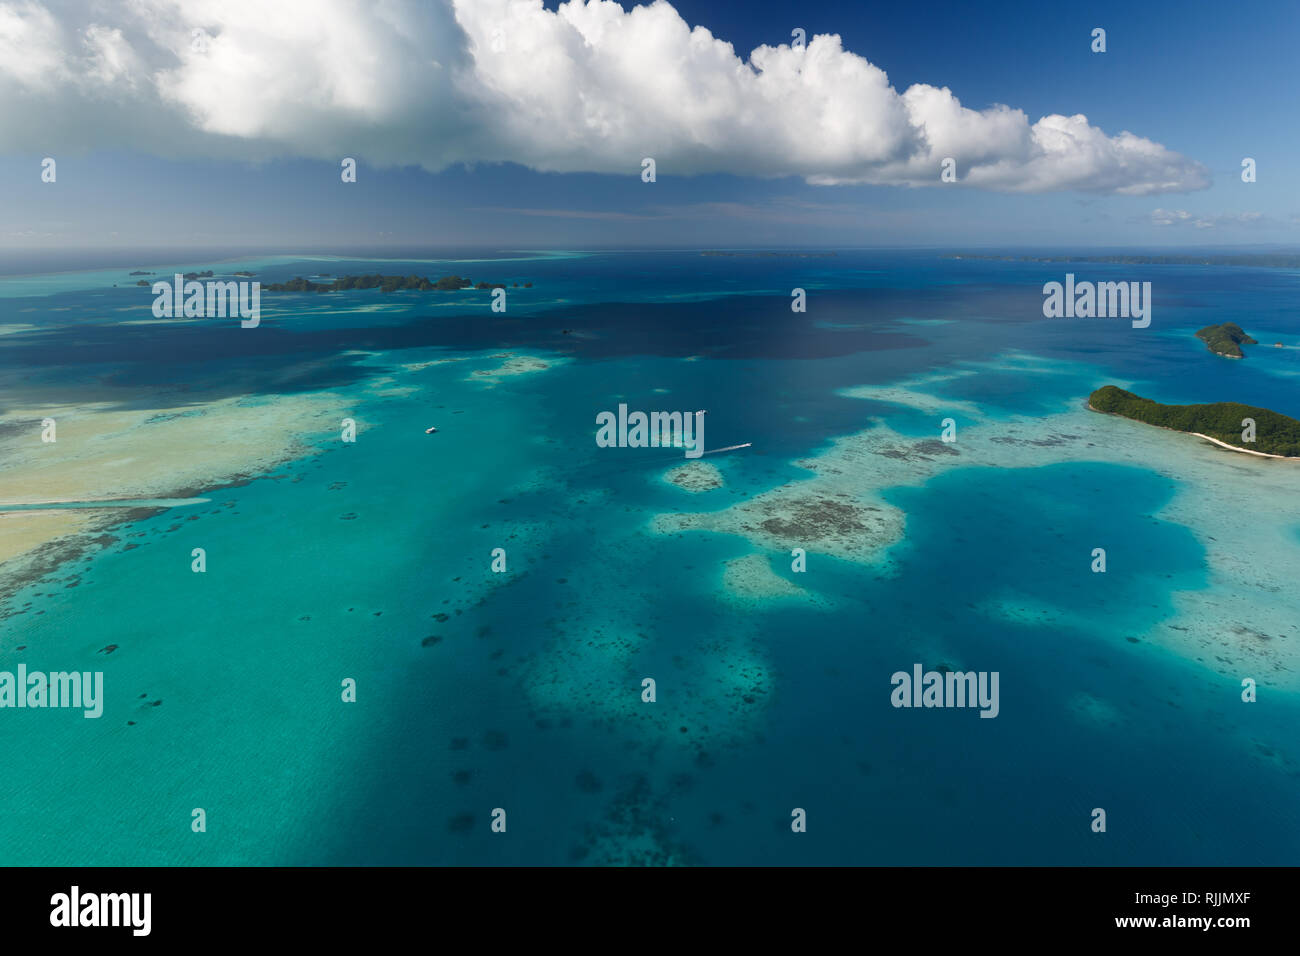 Aerial landscape of tropical islands, shallow coral reefs and boats under puffy white clouds Stock Photo